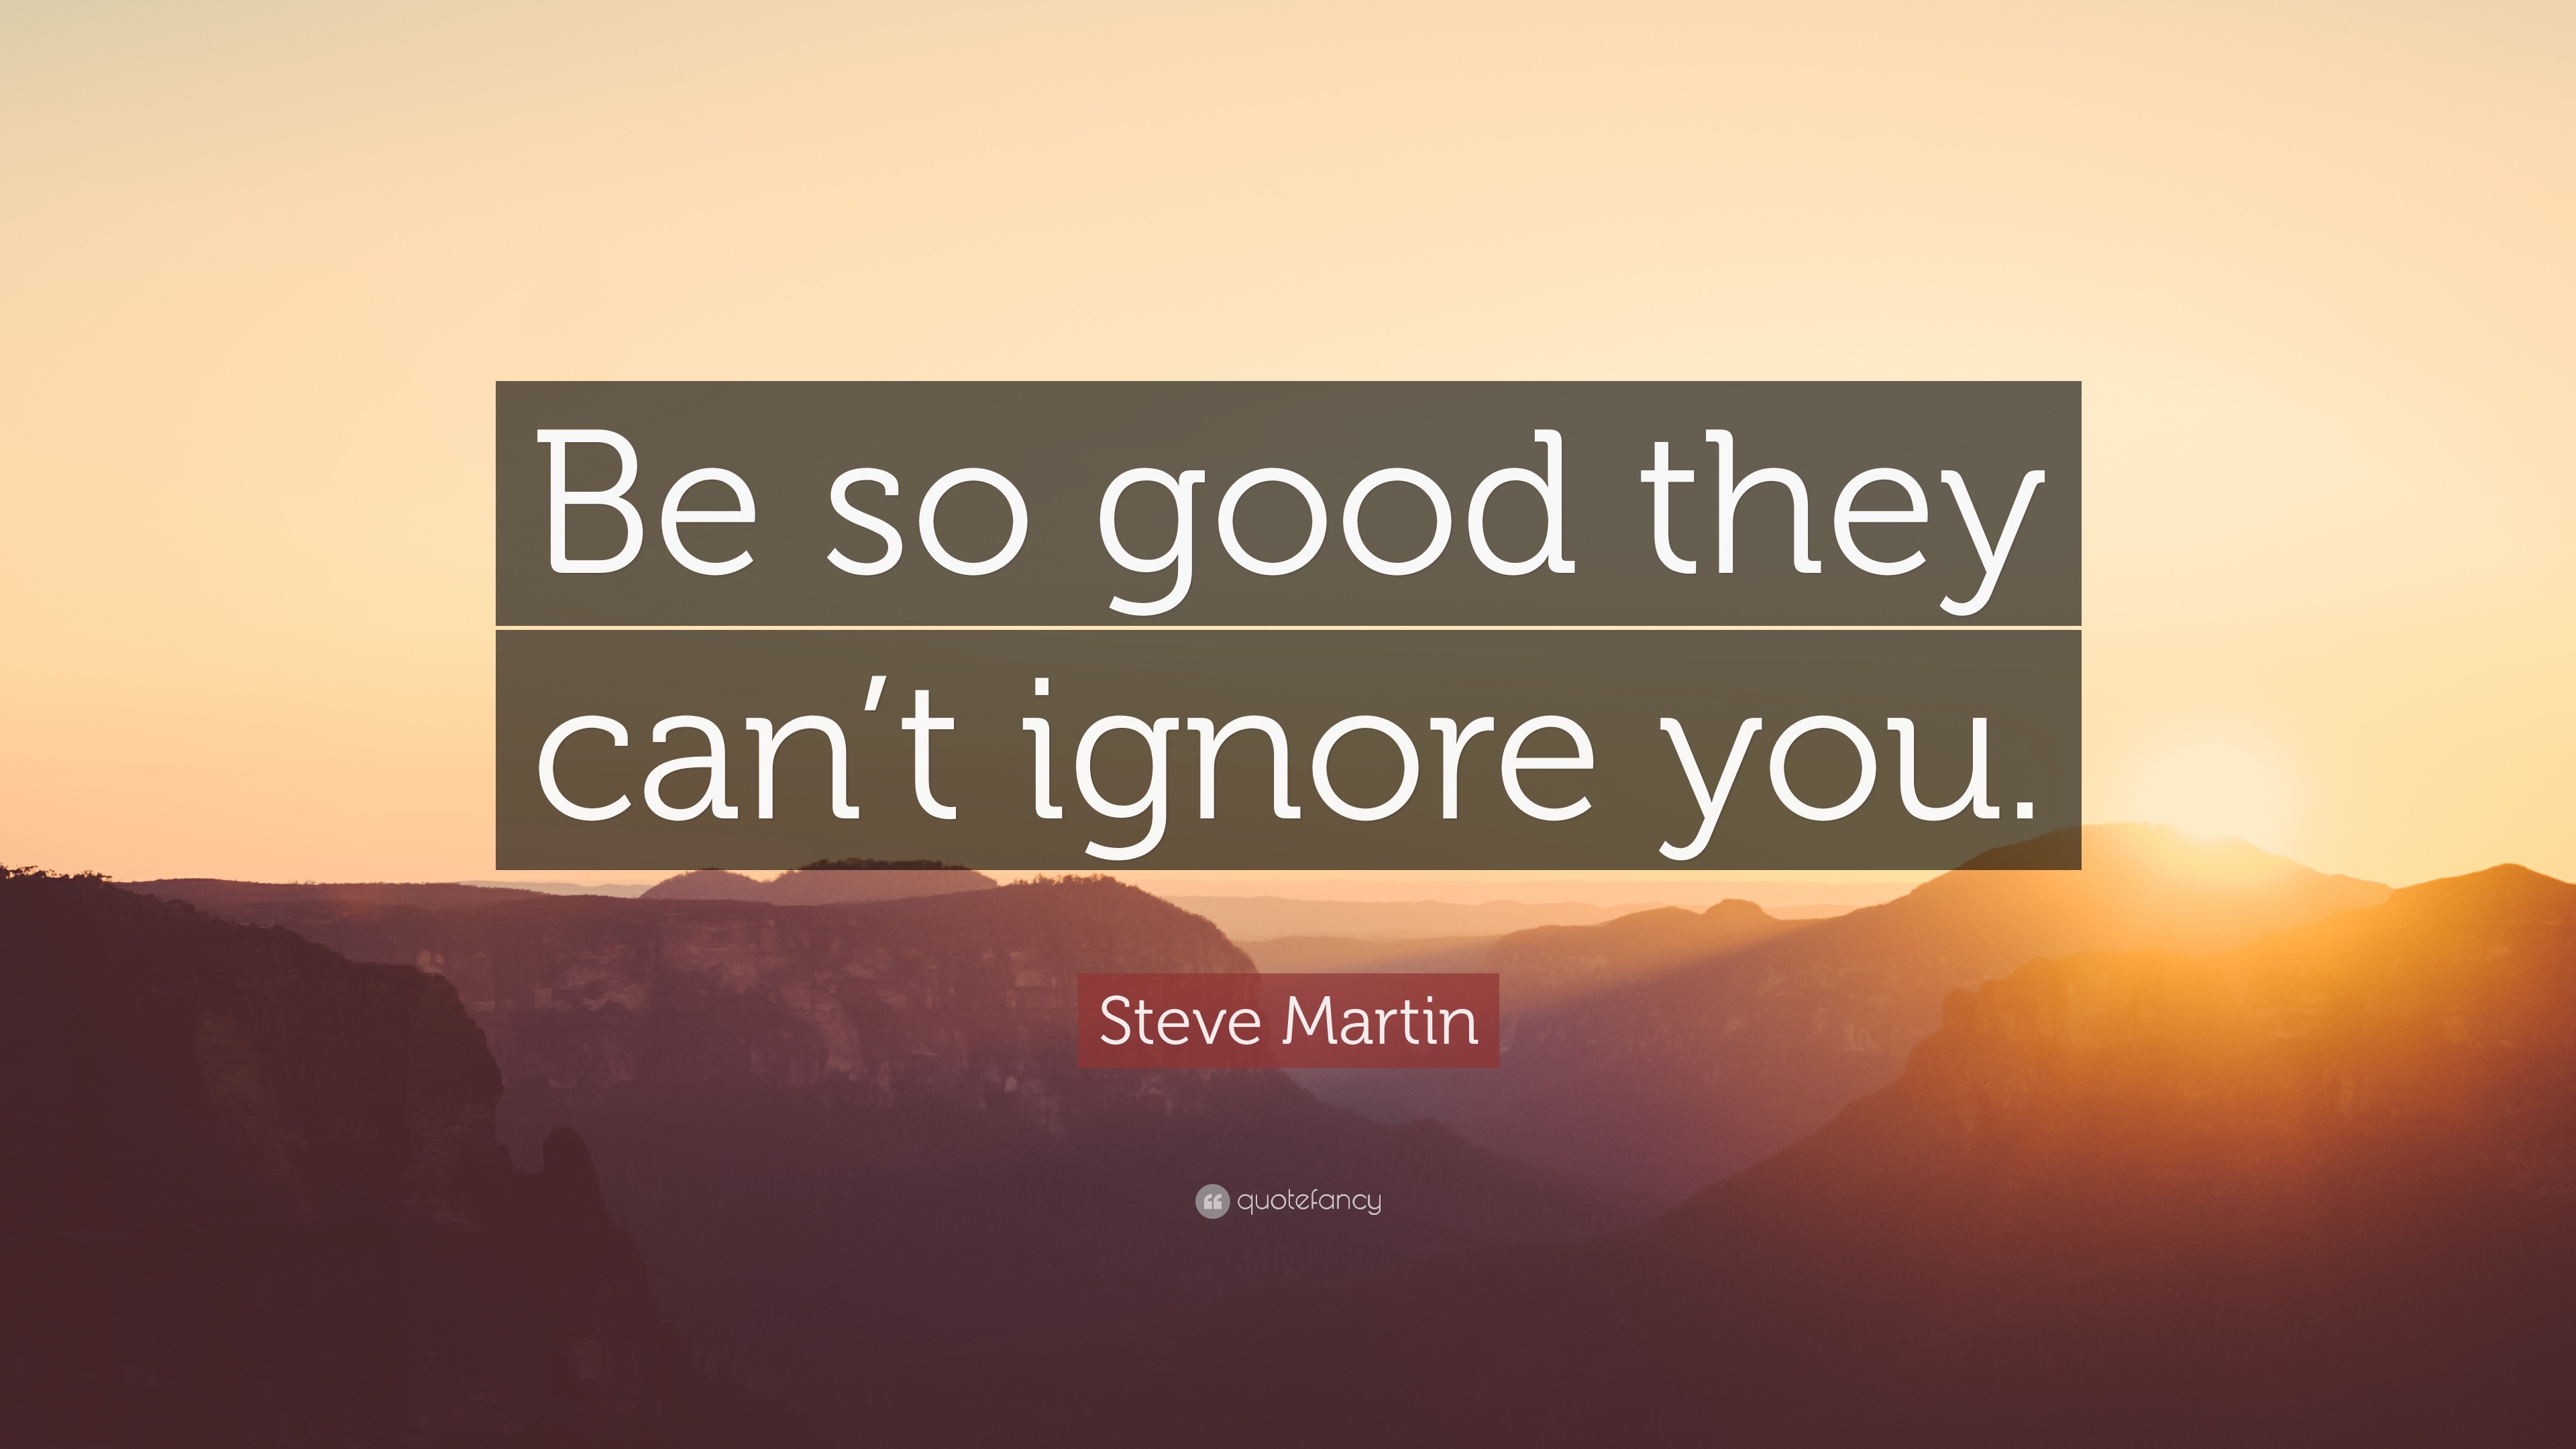 20835-Steve-Martin-Quote-Be-so-good-they-can-t-ignore-you.jpg 